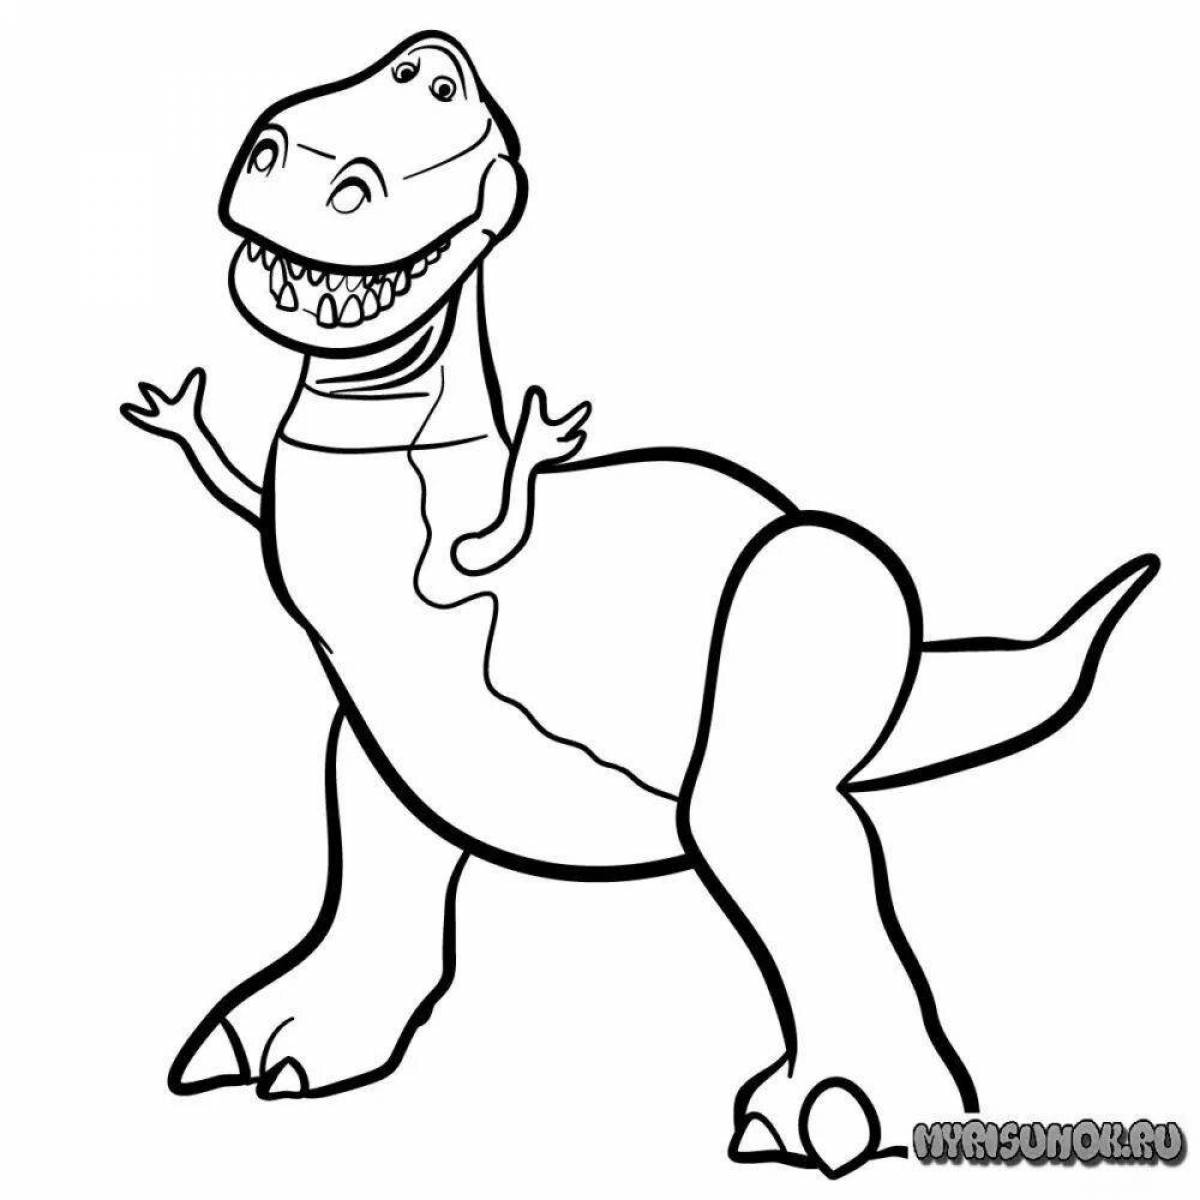 Dazzling dinosaur coloring pages